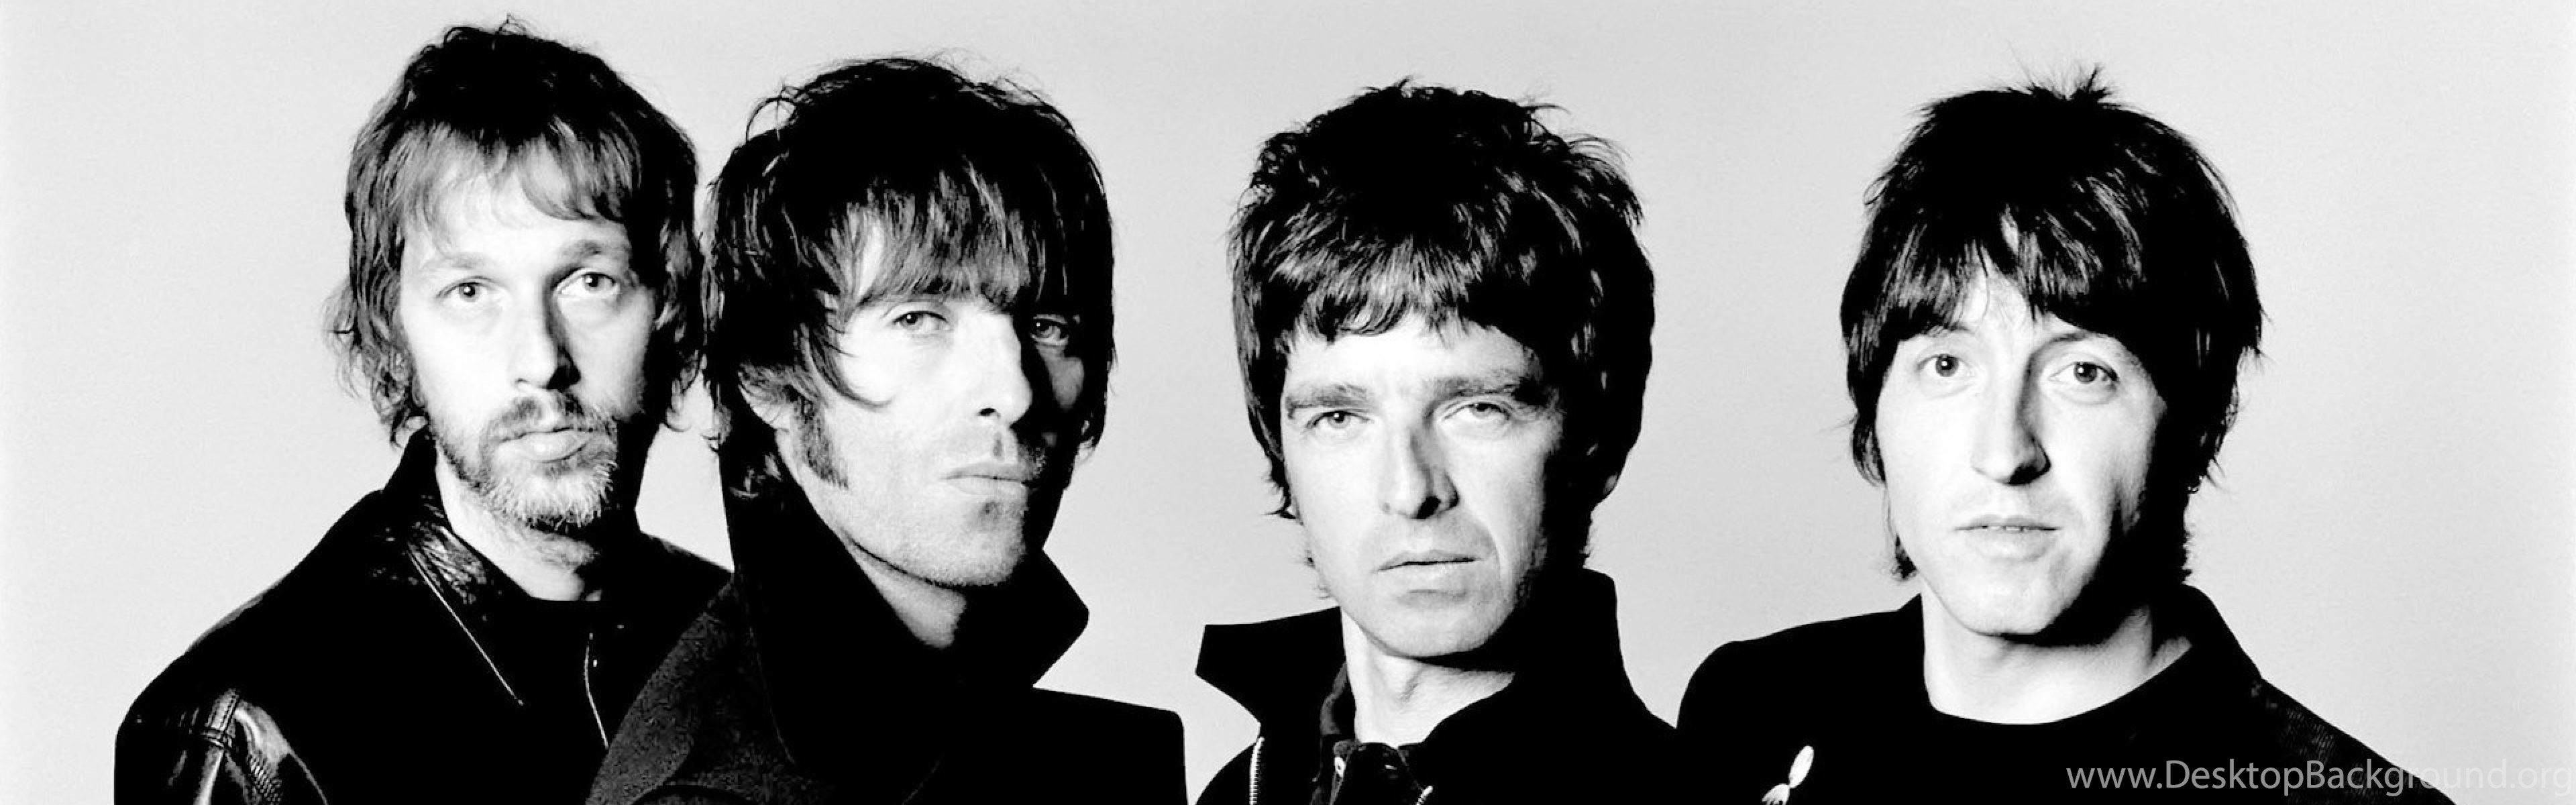 Download Wallpaper 3840x1200 Oasis, Band, Members, Hairs, Suits